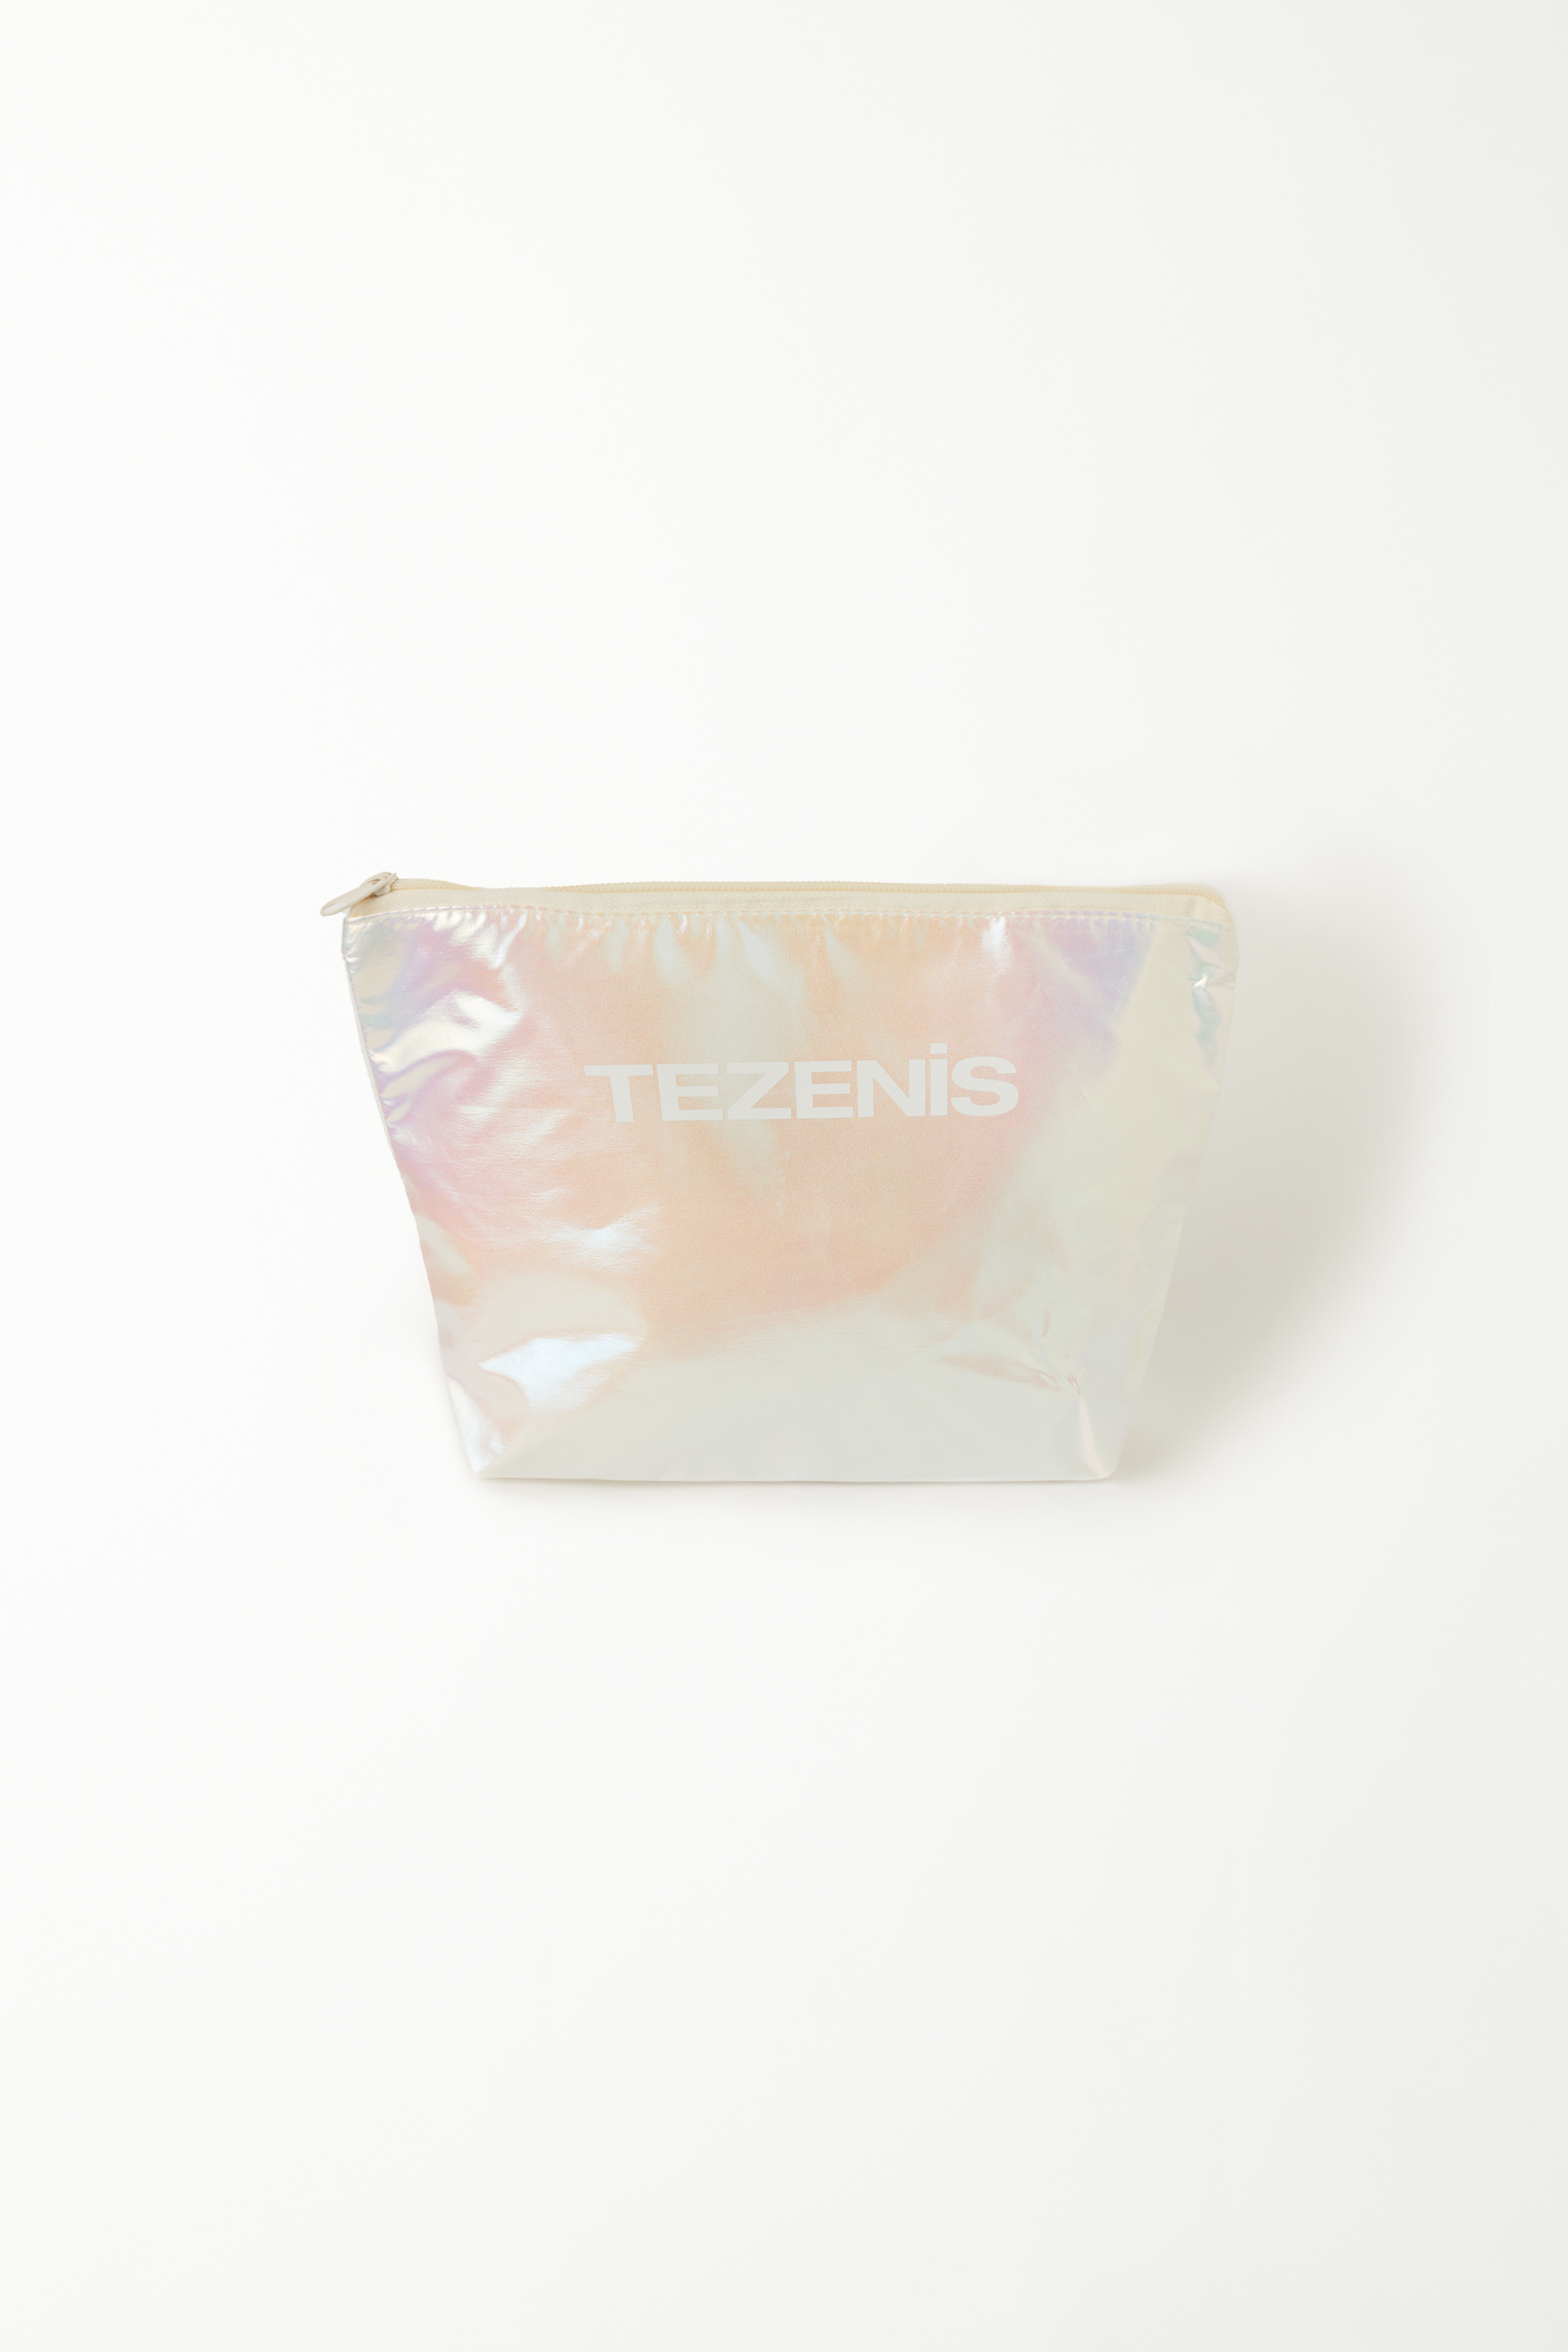 Recycled Plastic Zipper Pouch